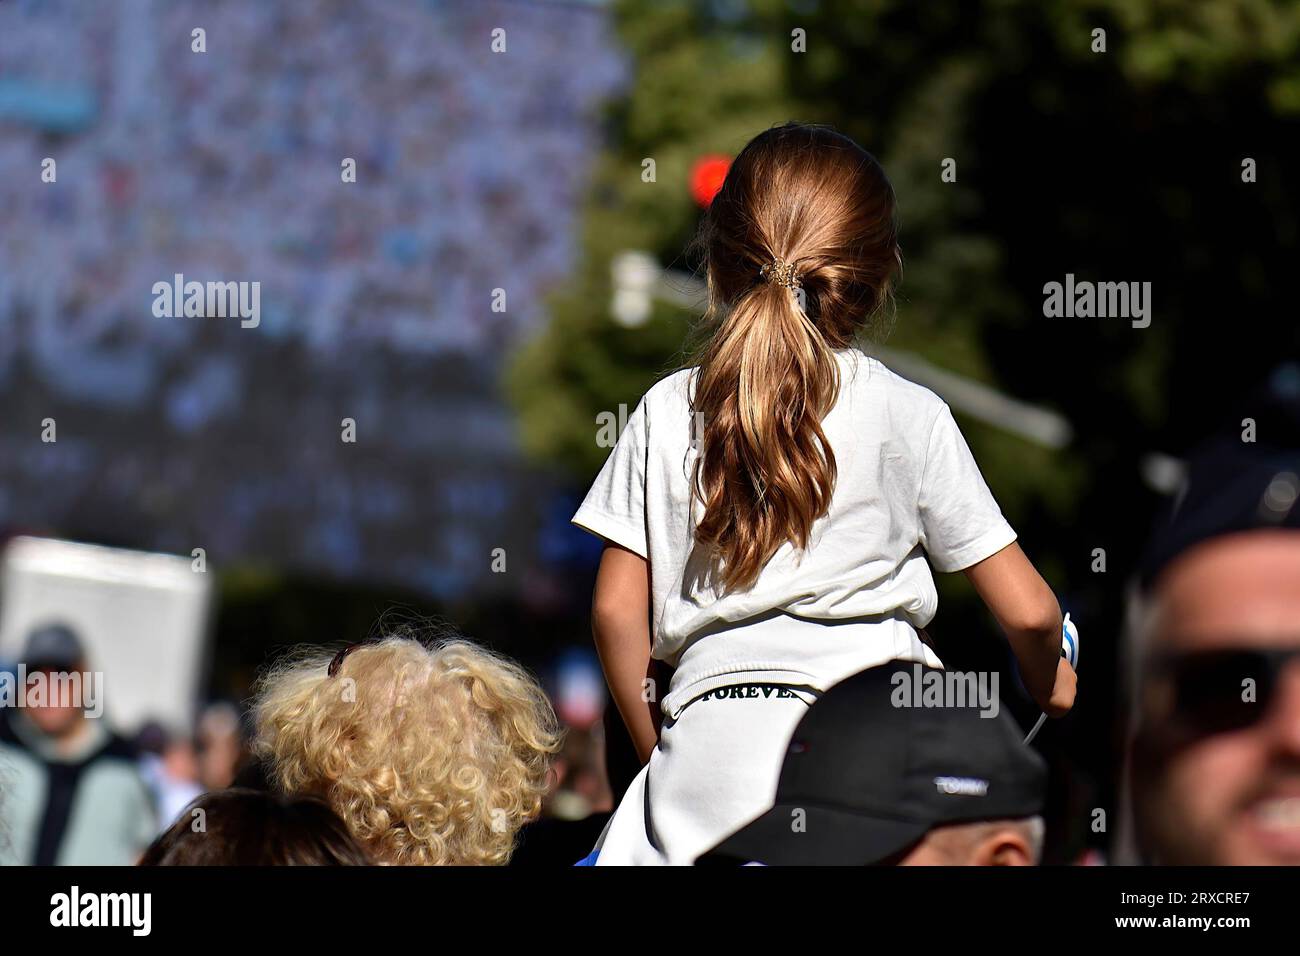 A child perched on his father's shoulders attend the mass given by Pope Francis at the Vélodrome on a super giant screen. Thousands of people came to see Pope Francis stroll in his “Papamobile” on Avenue du Prado, they attended the high mass on giant screens at the Vélodrome stadium. Stock Photo